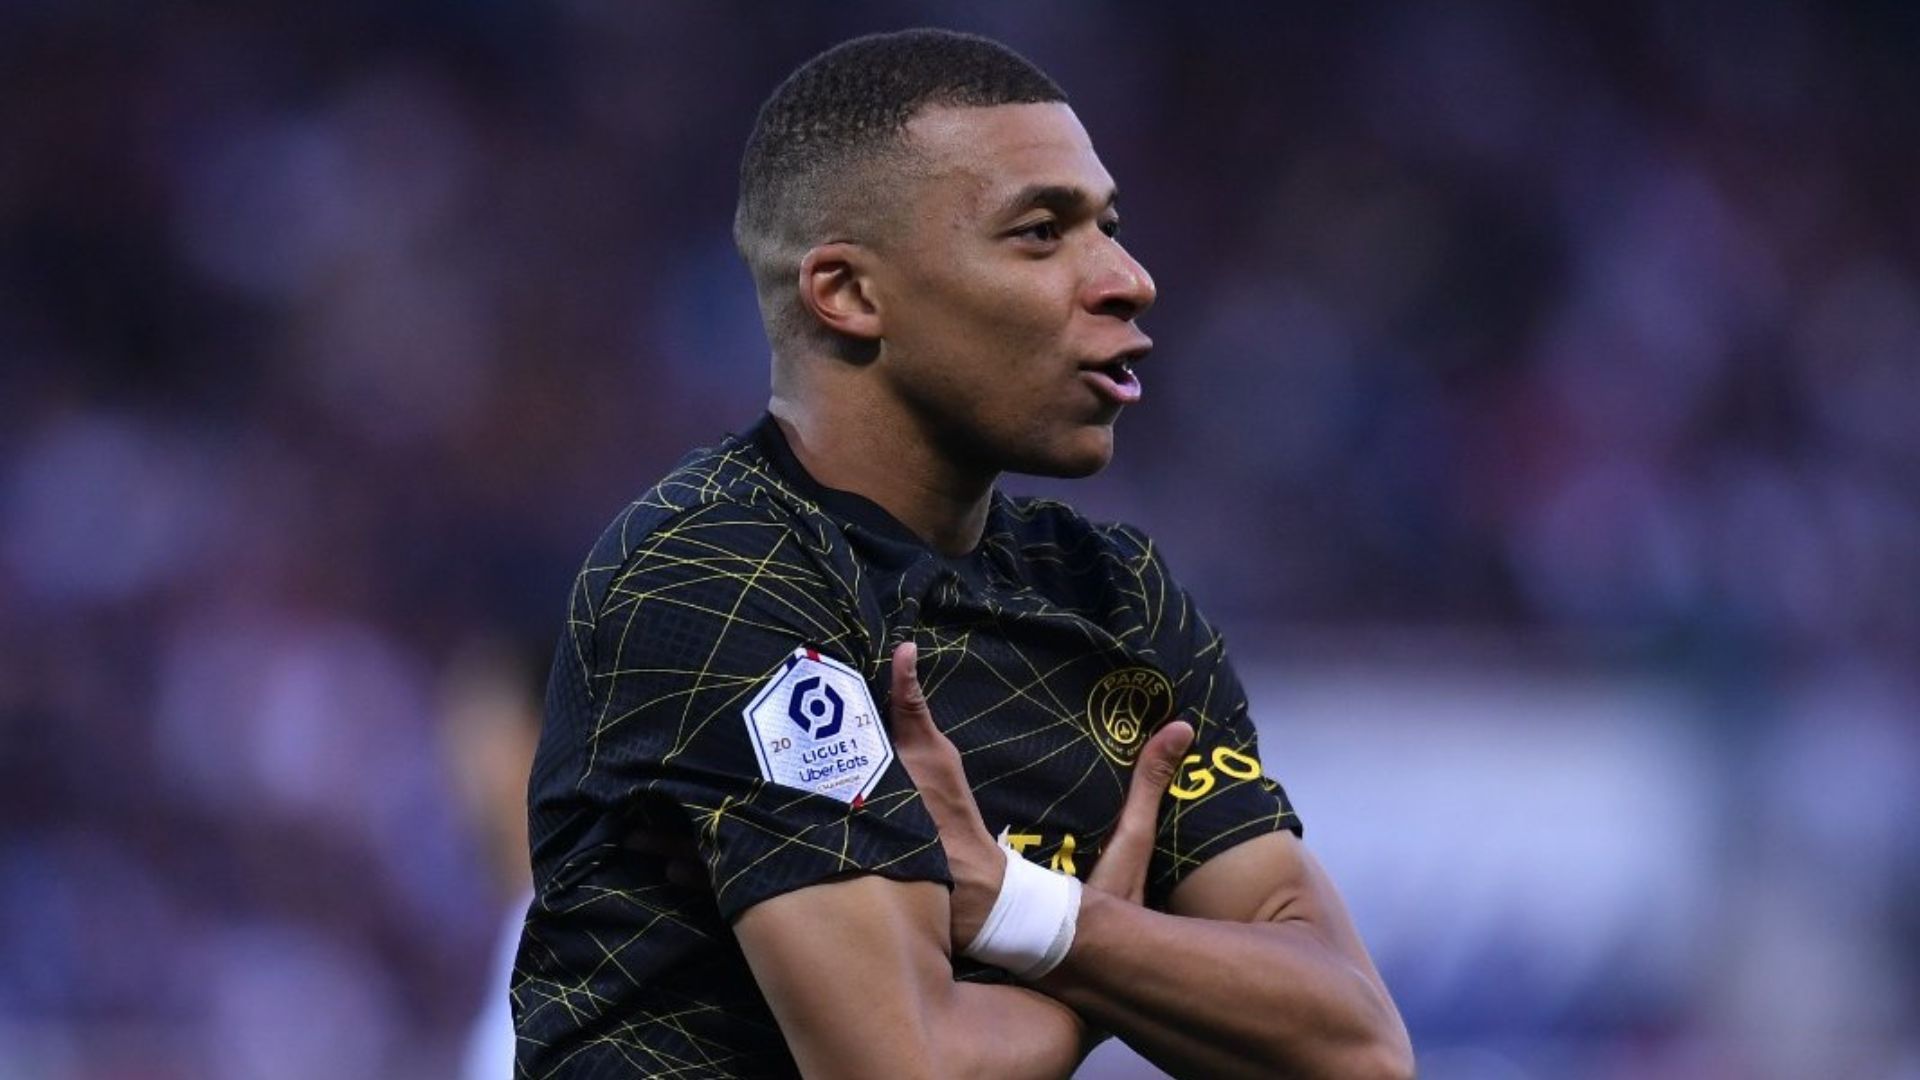 Mbappé was the name of the match, with two goals scored (Credit: Reproduction / Twitter)